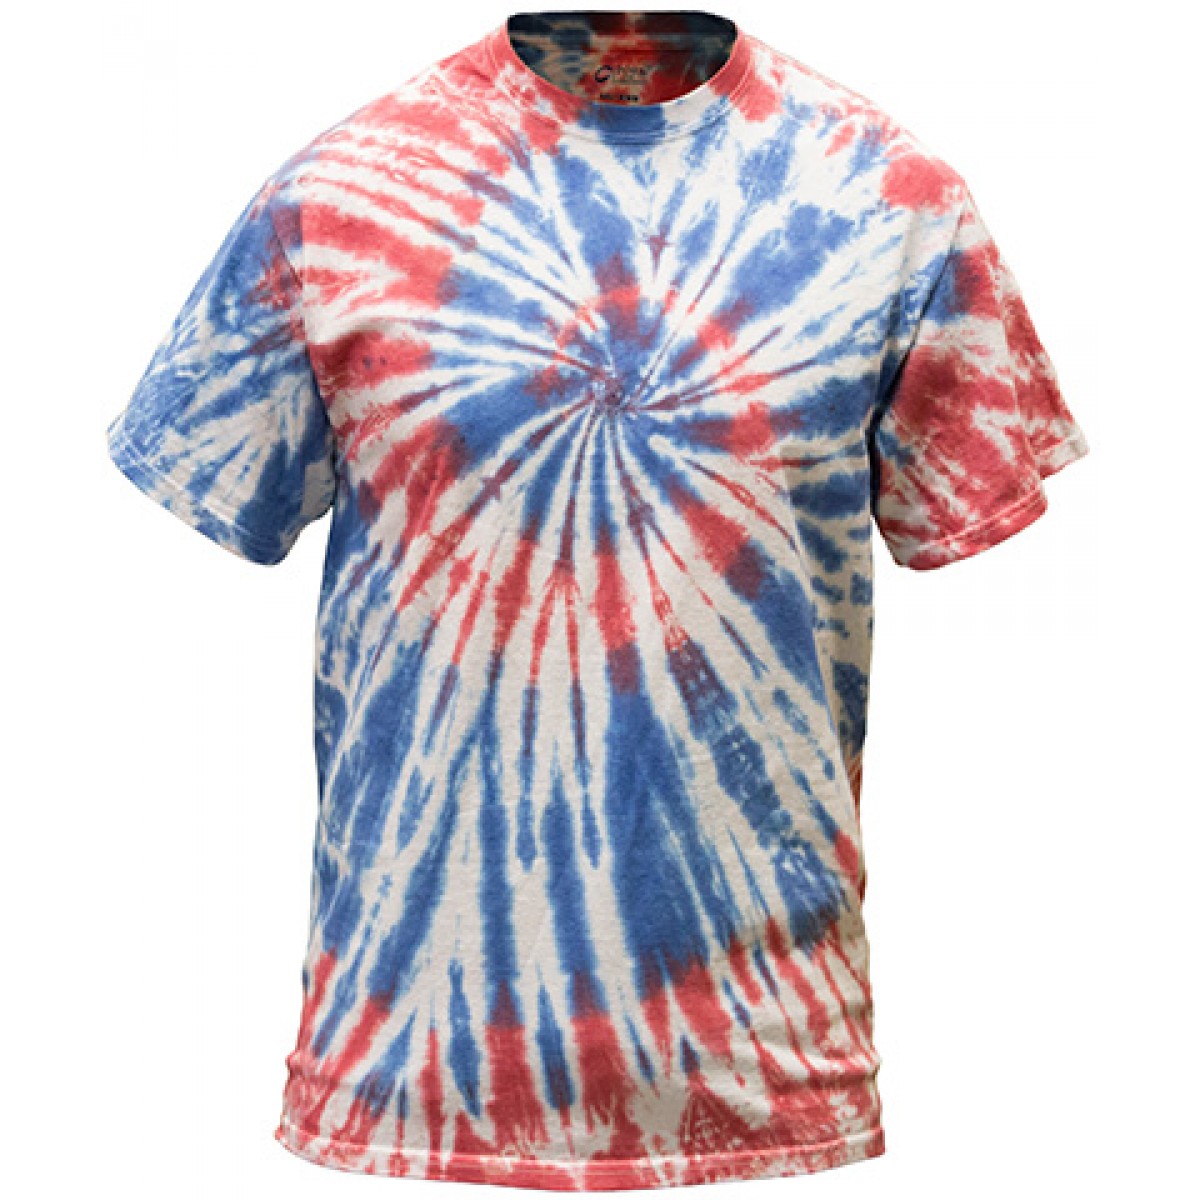 Multi-Color Tie-Dye Tee -Red/White/Blue-L